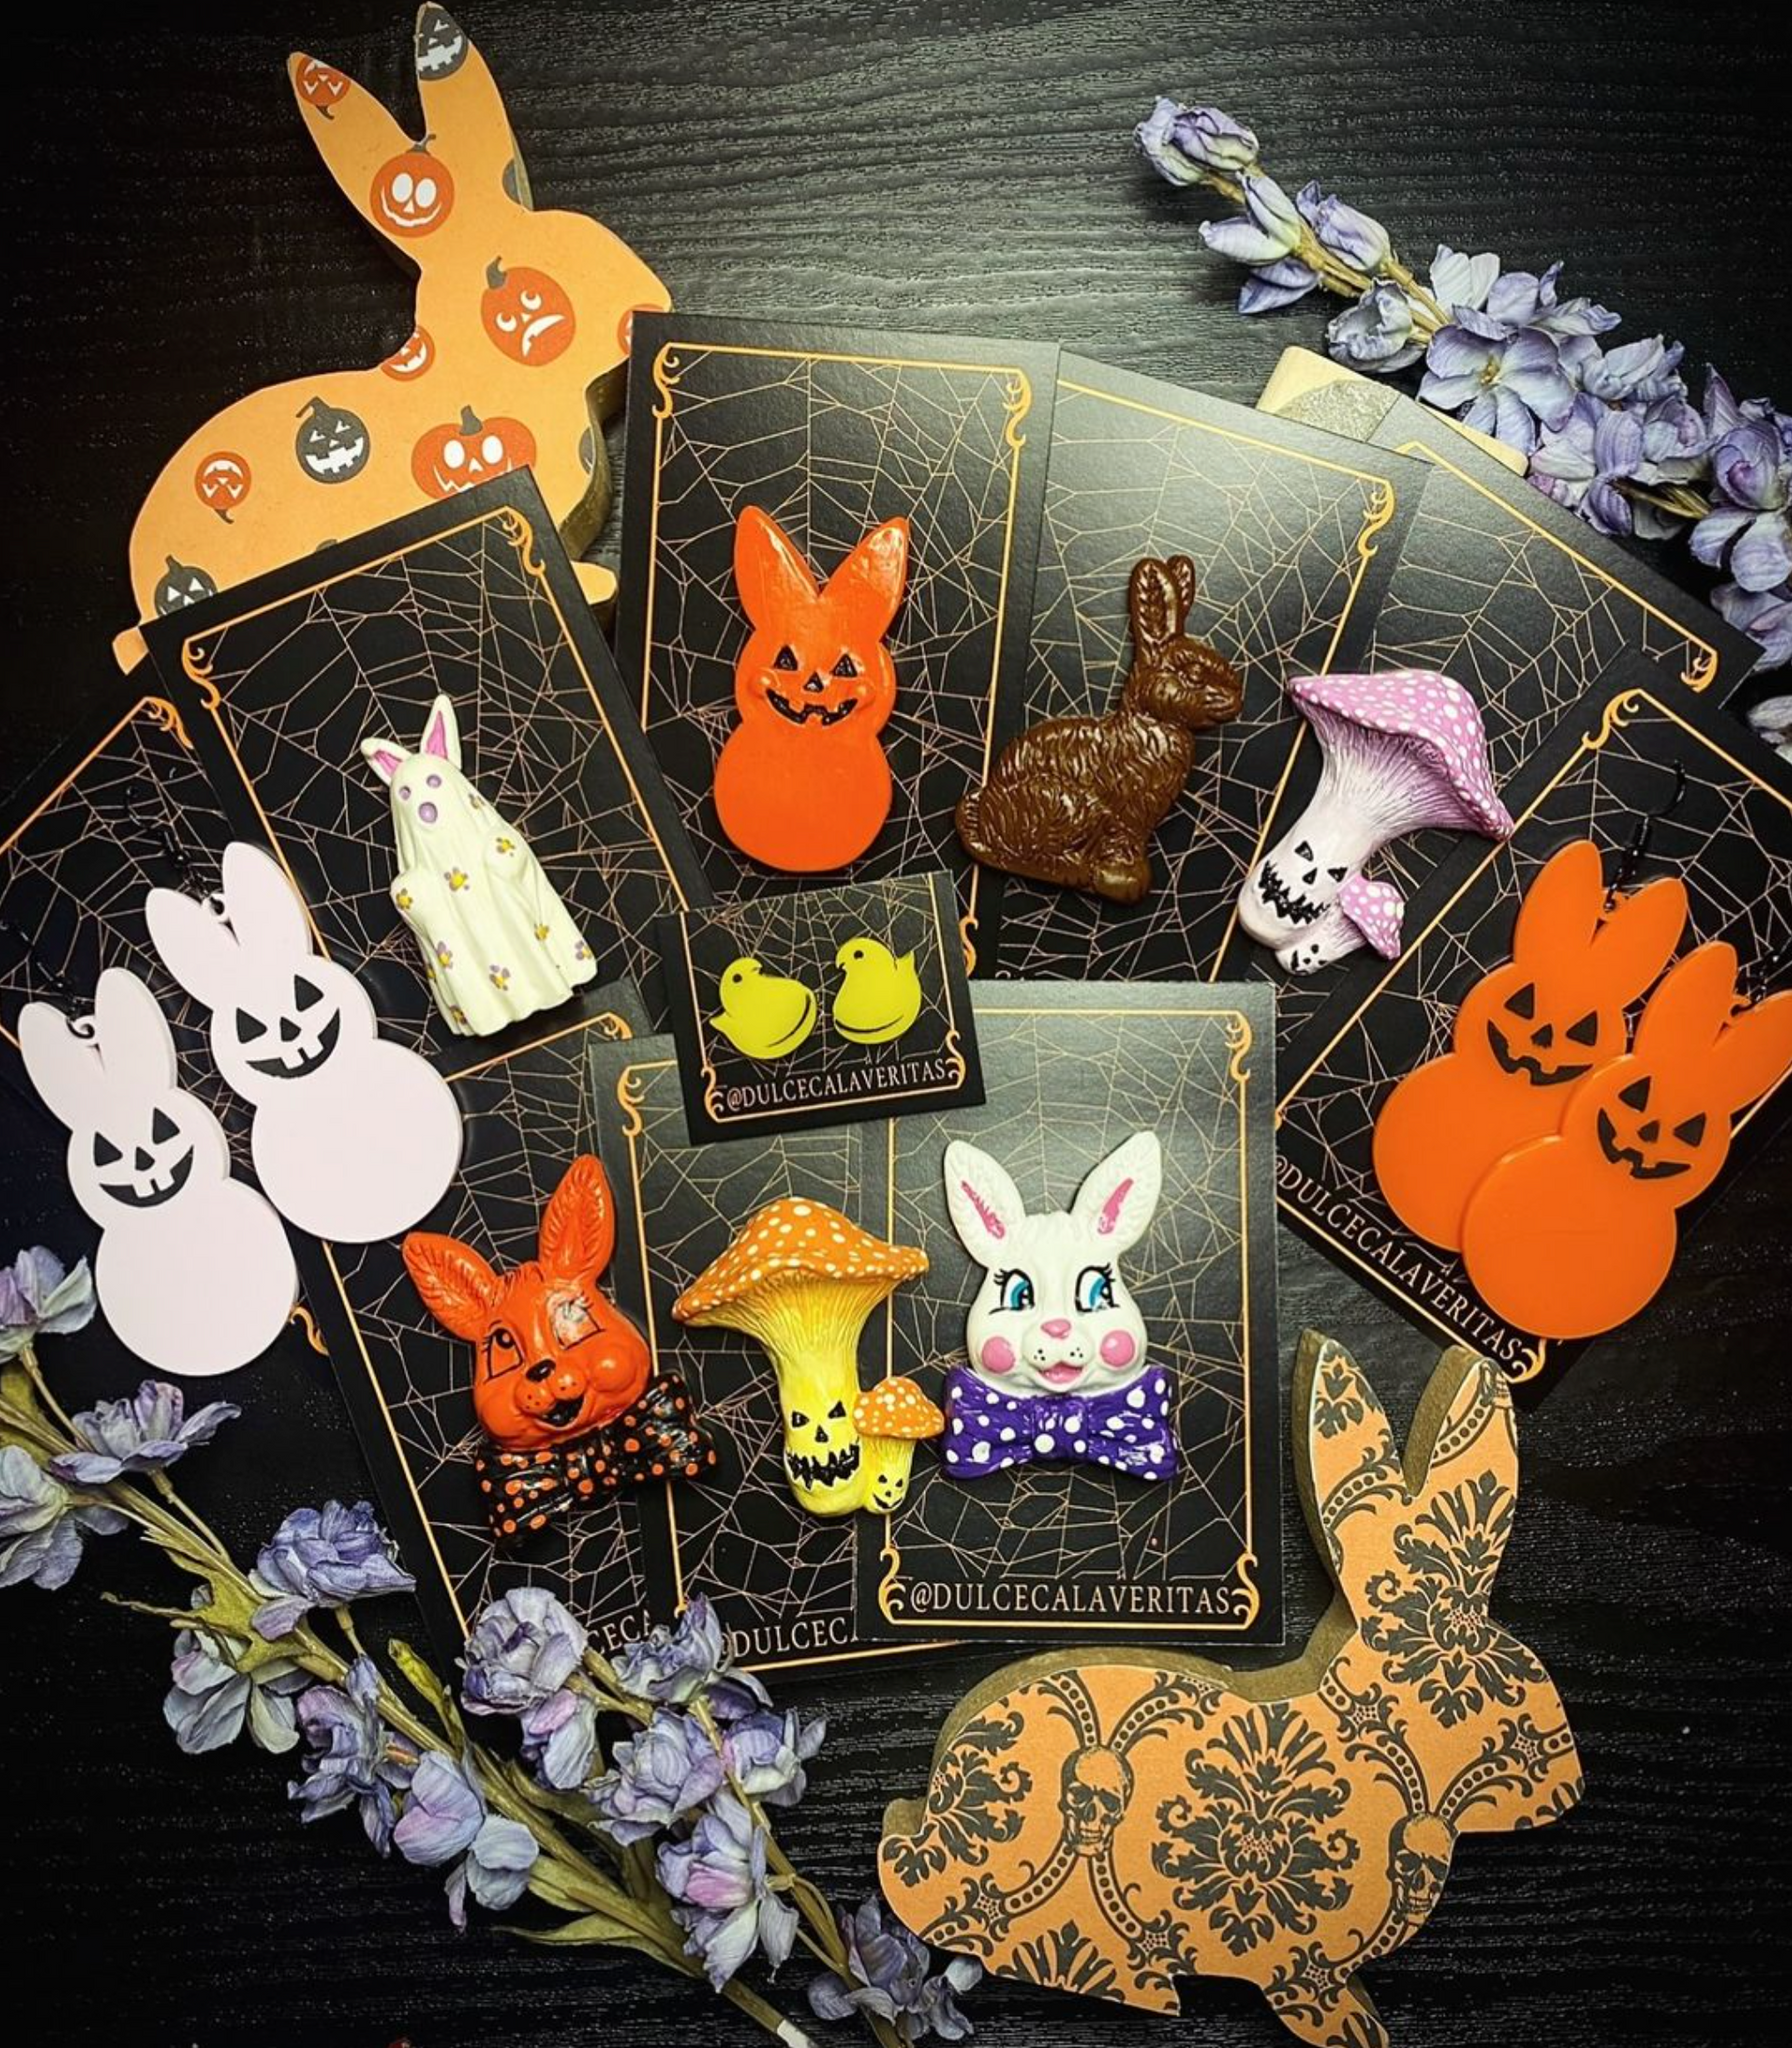 Easter ween, easter-ween, easterween, Easter halloween, spooky easter themed pin badges, brooches, earrings and jewellery.